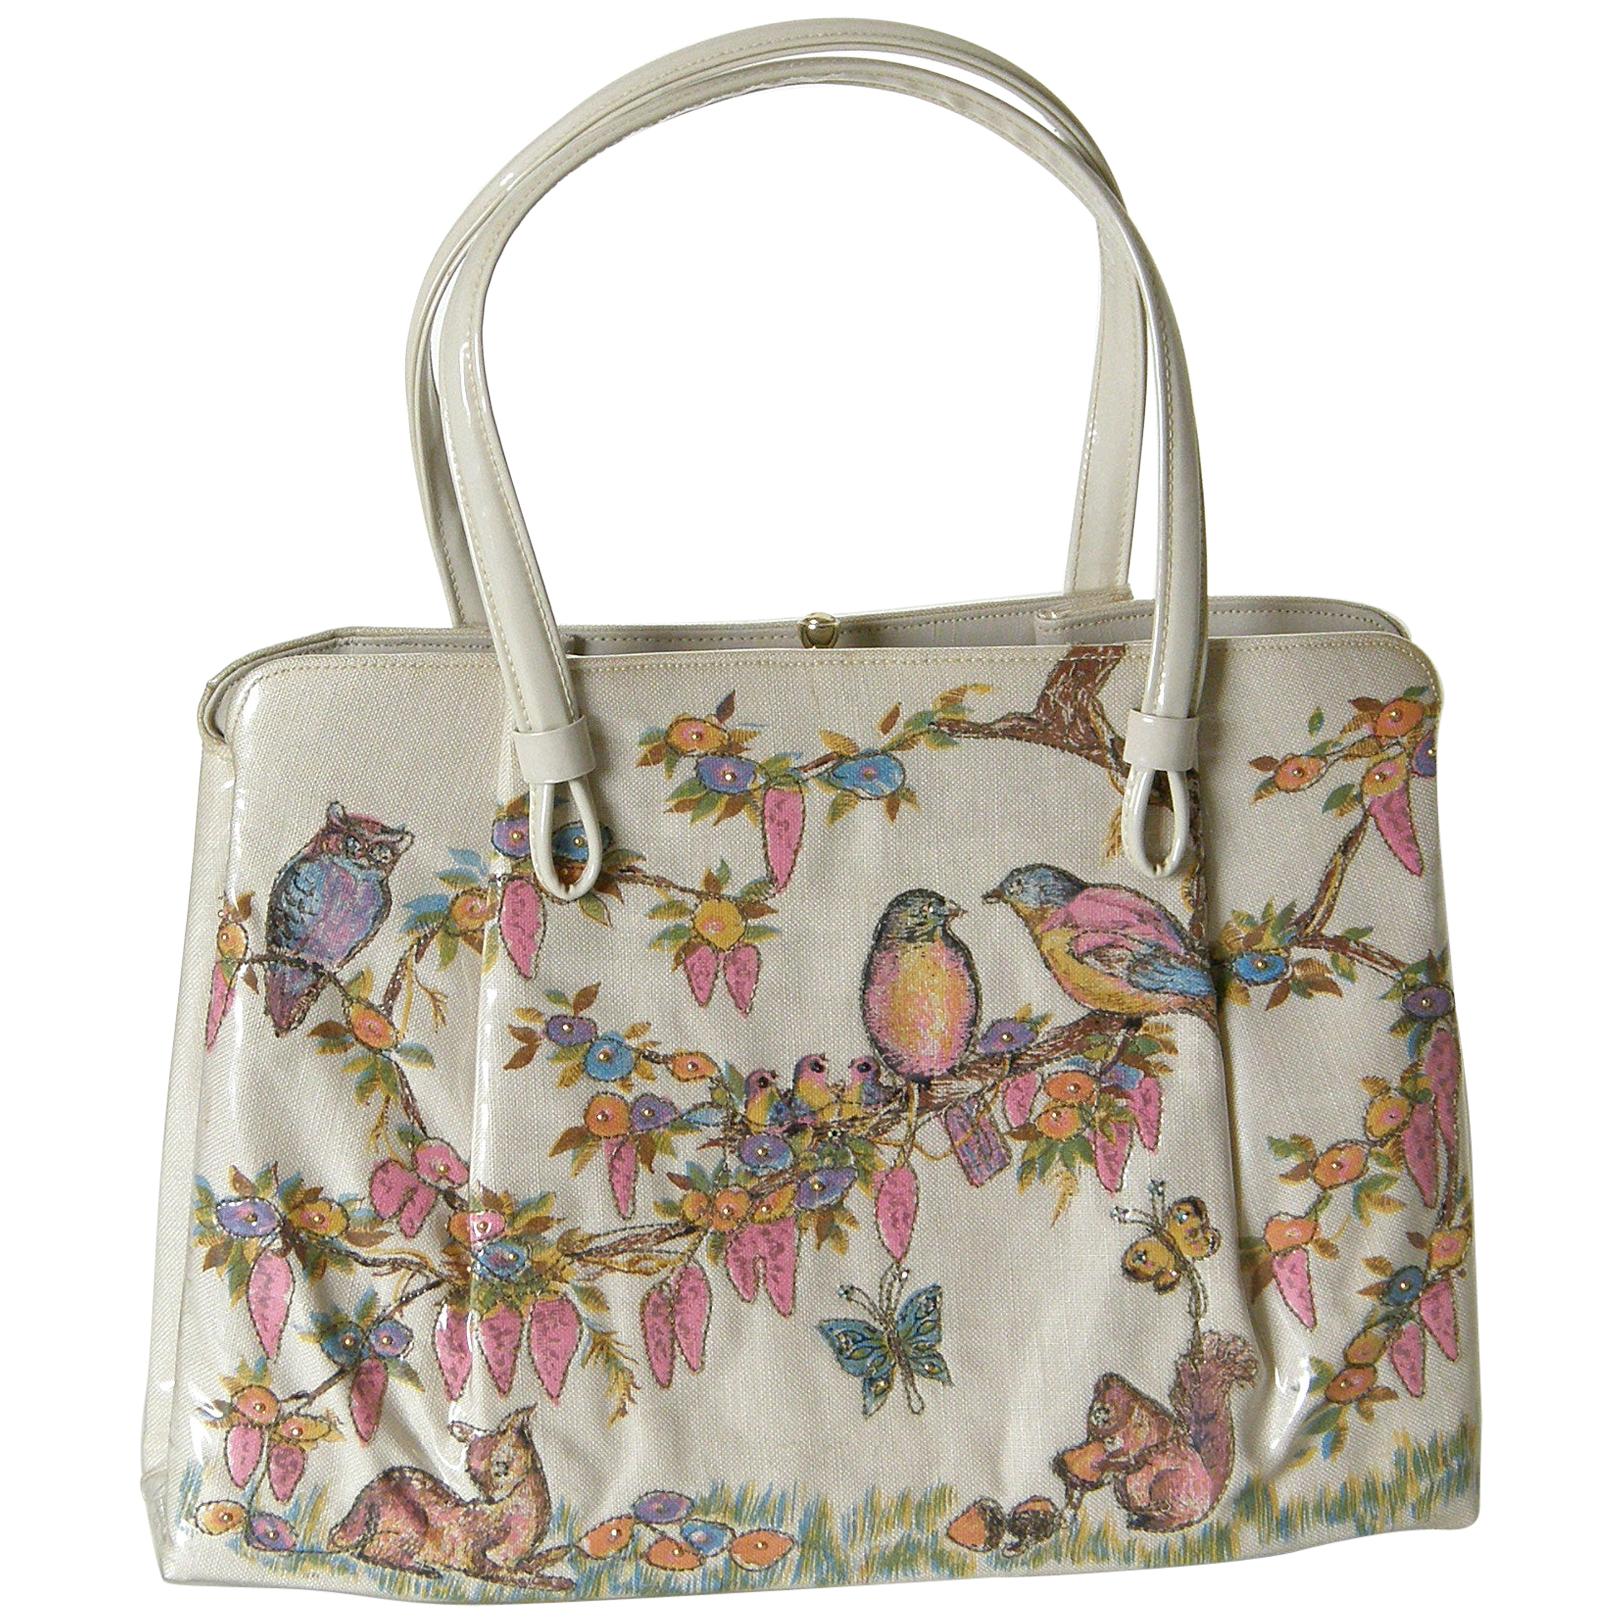 Spring Theme Handbag by Soure' with Woodland Animals Print Fabric on Front Panel